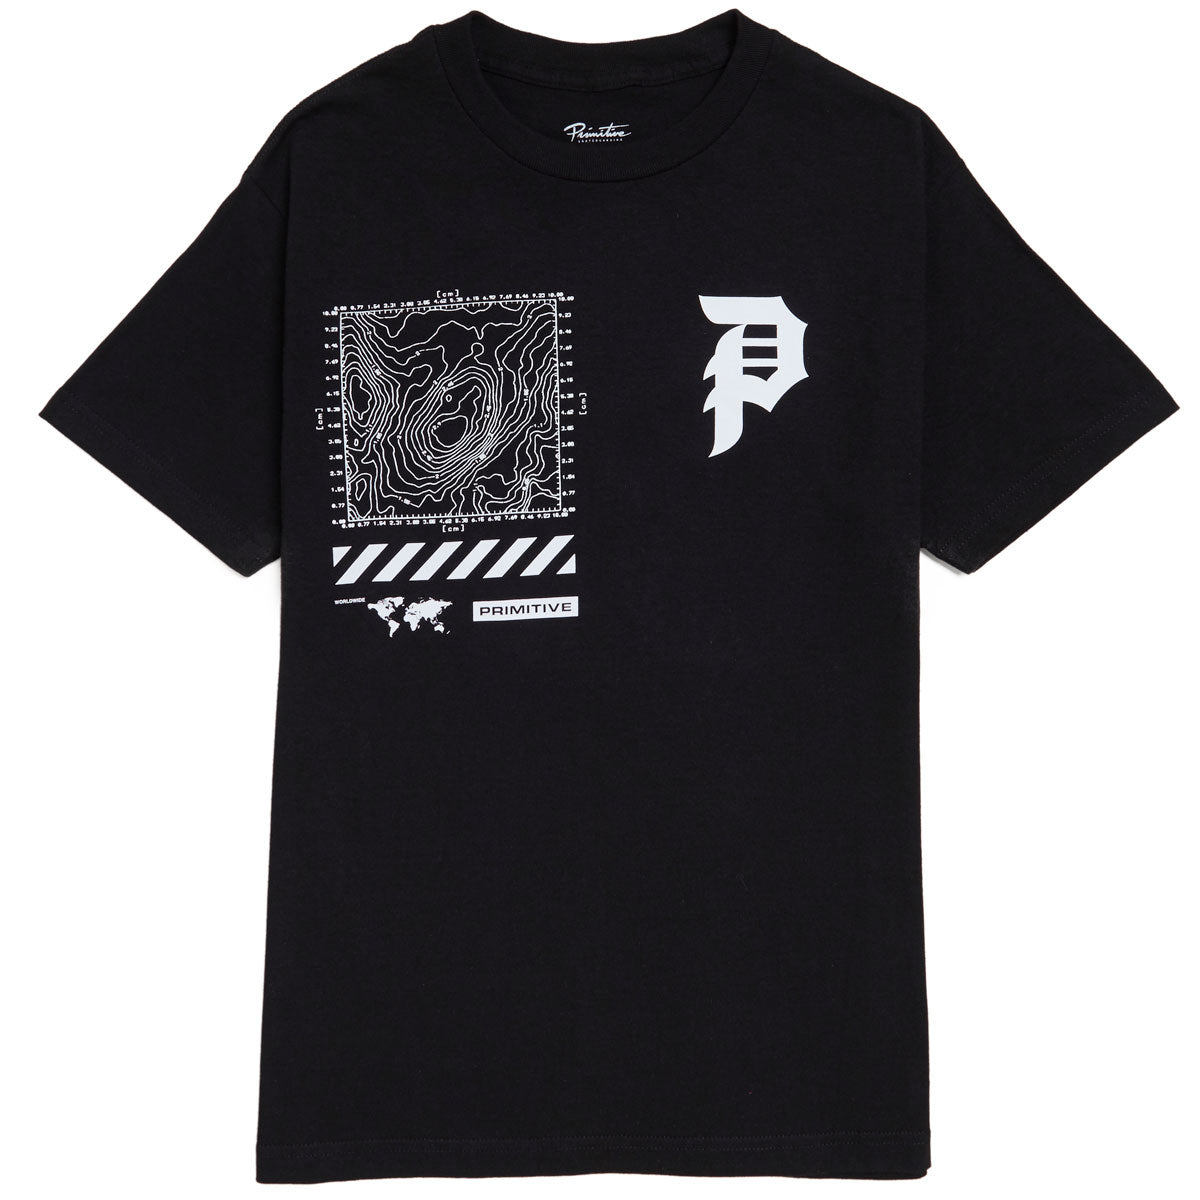 Primitive x Call Of Duty Mapping Dirty P T-Shirt - Black image 1